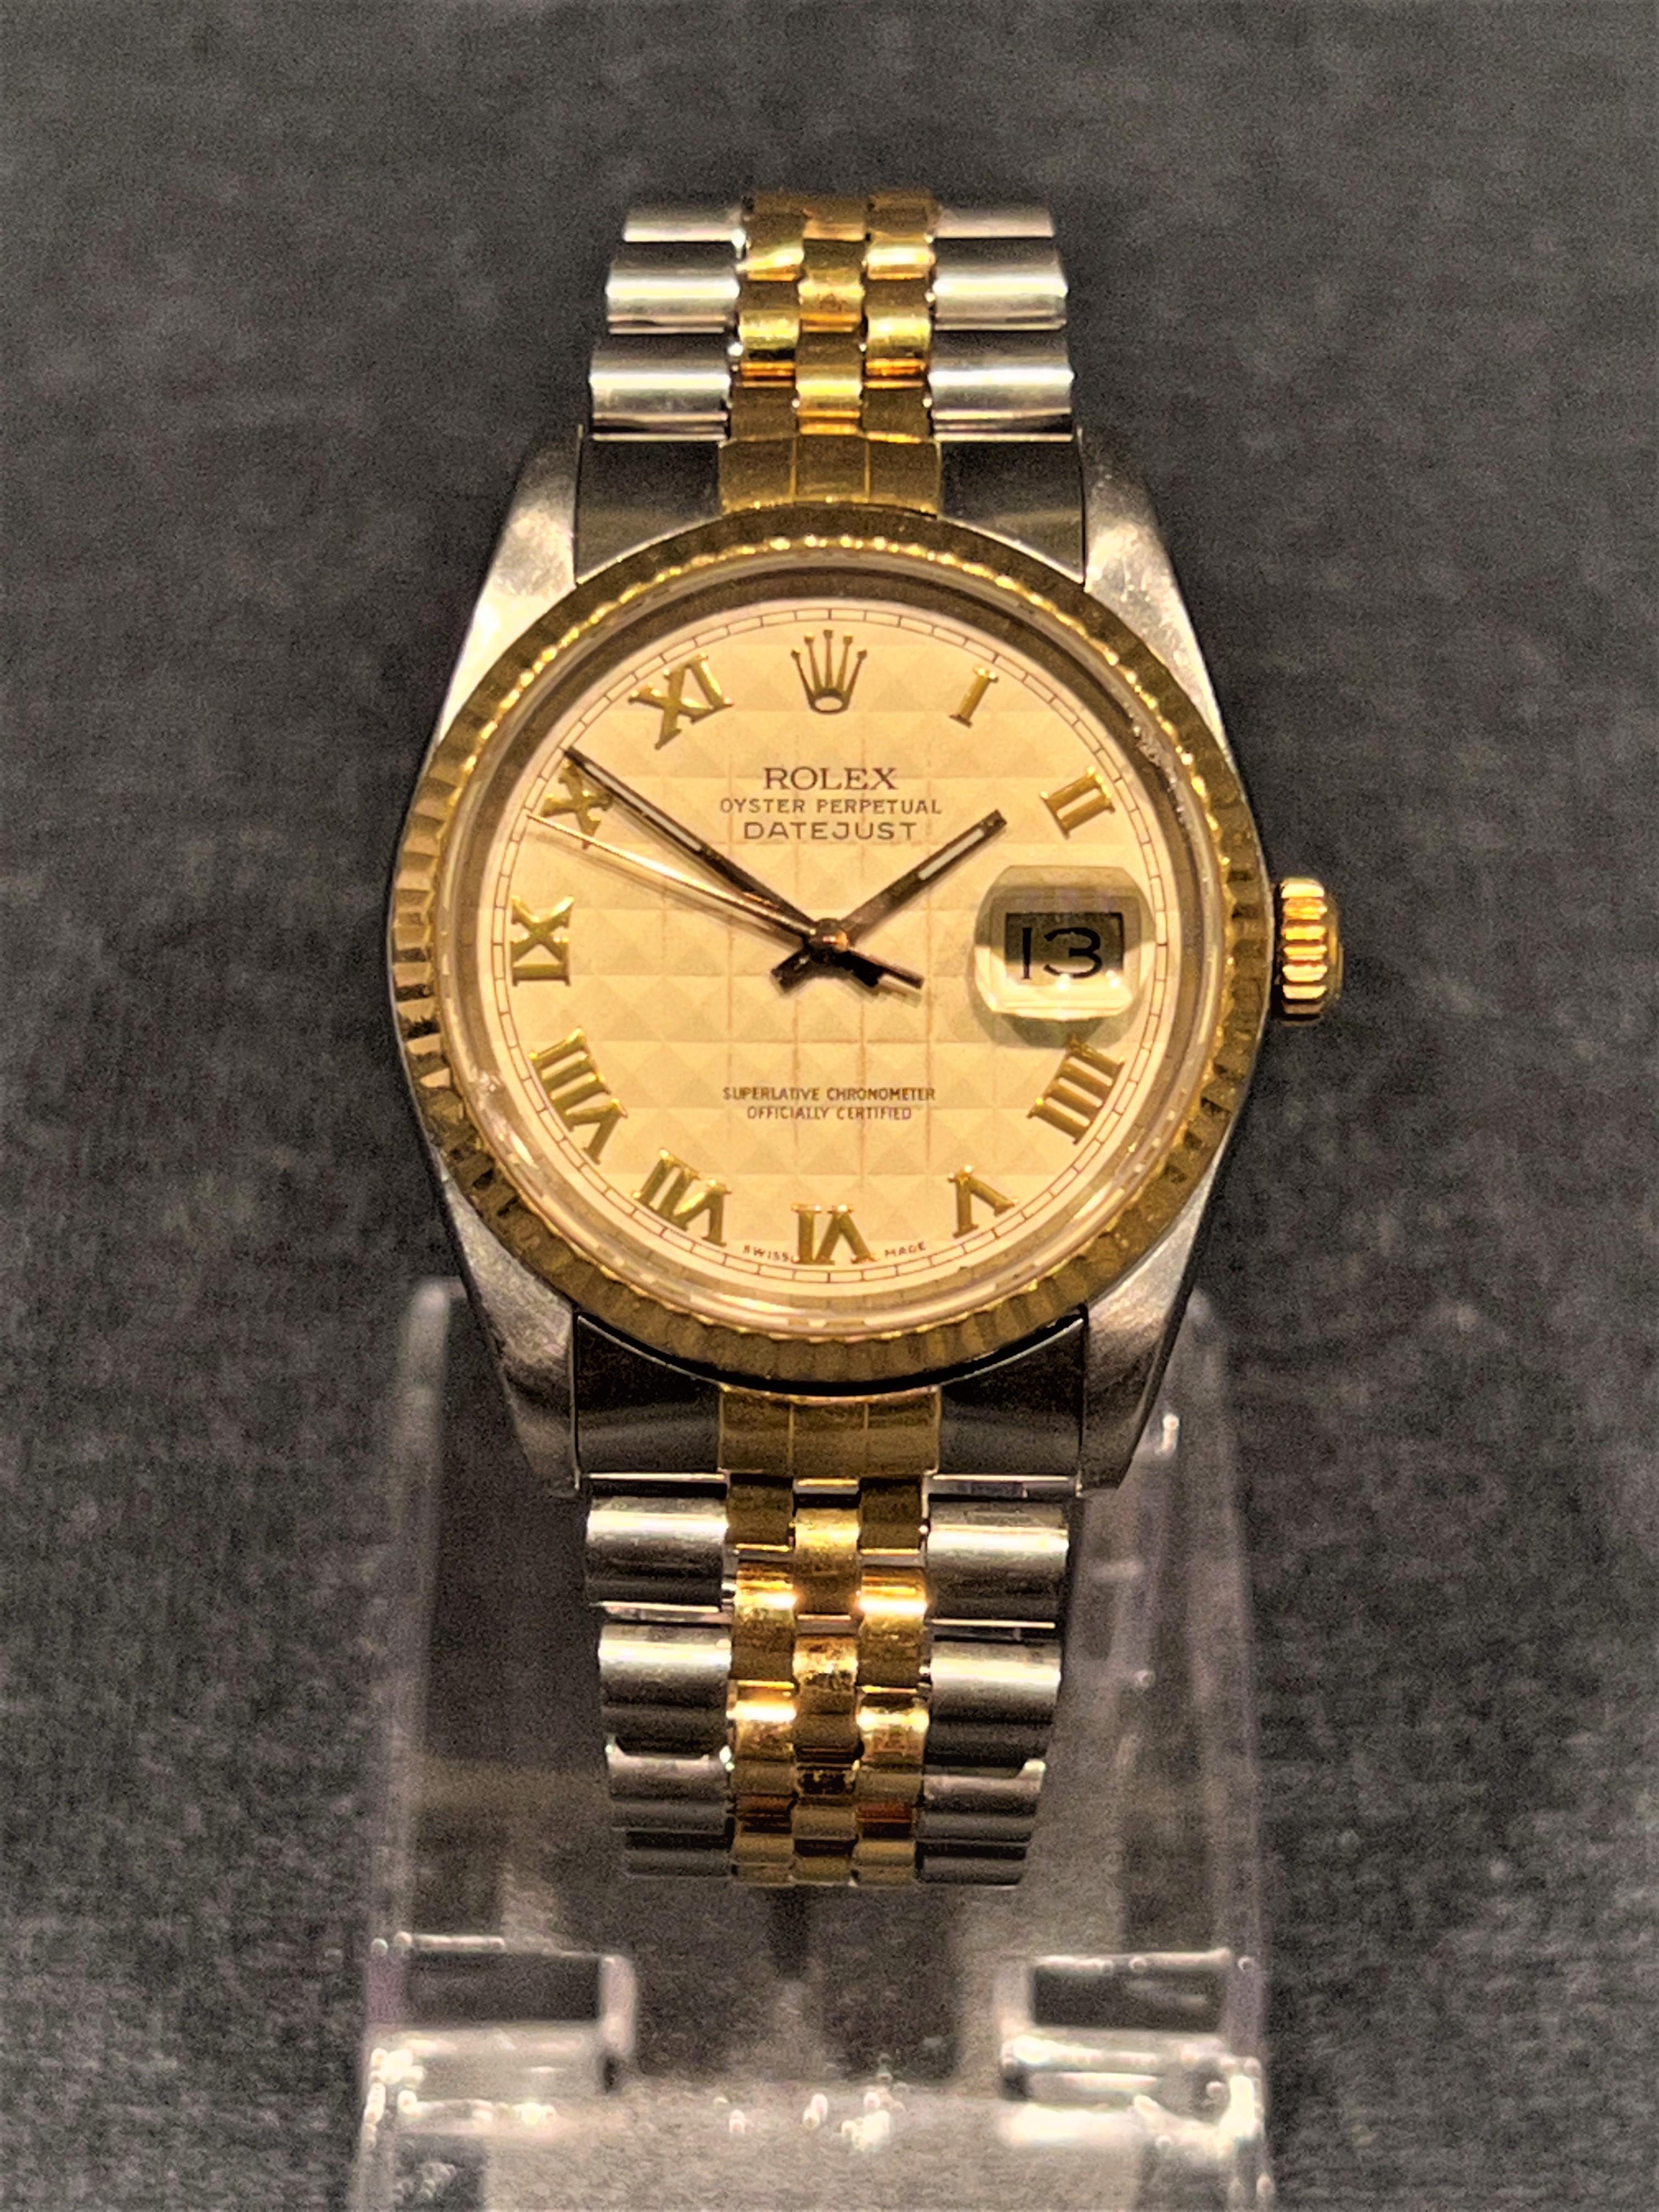 Brand: Rolex
Type: Wristwatch
Model Name: Datejust Roman Pyramid Dial
Model Number: 16233
Serial Number: R619XXX
Lug to Lug (mm): 43.5
Case to Case (mm): 36
Bezel Material: 18K Yellow Gold
Case Material: Stainless Steel
Caseback Material: Stainless